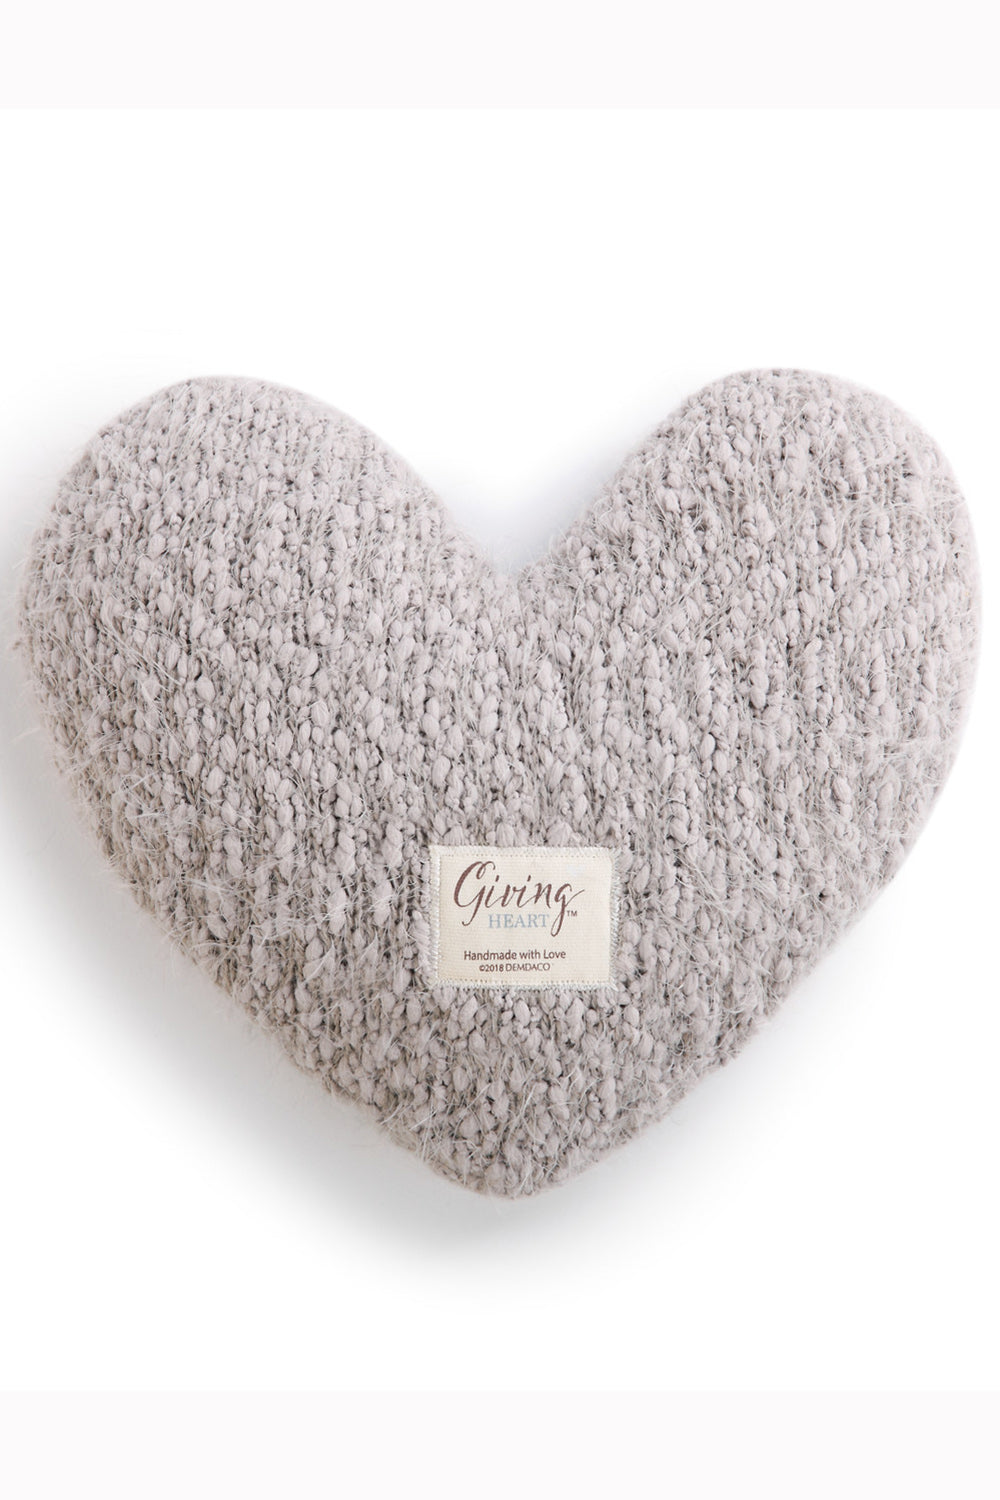 Giving Heart Pillow - Taupe